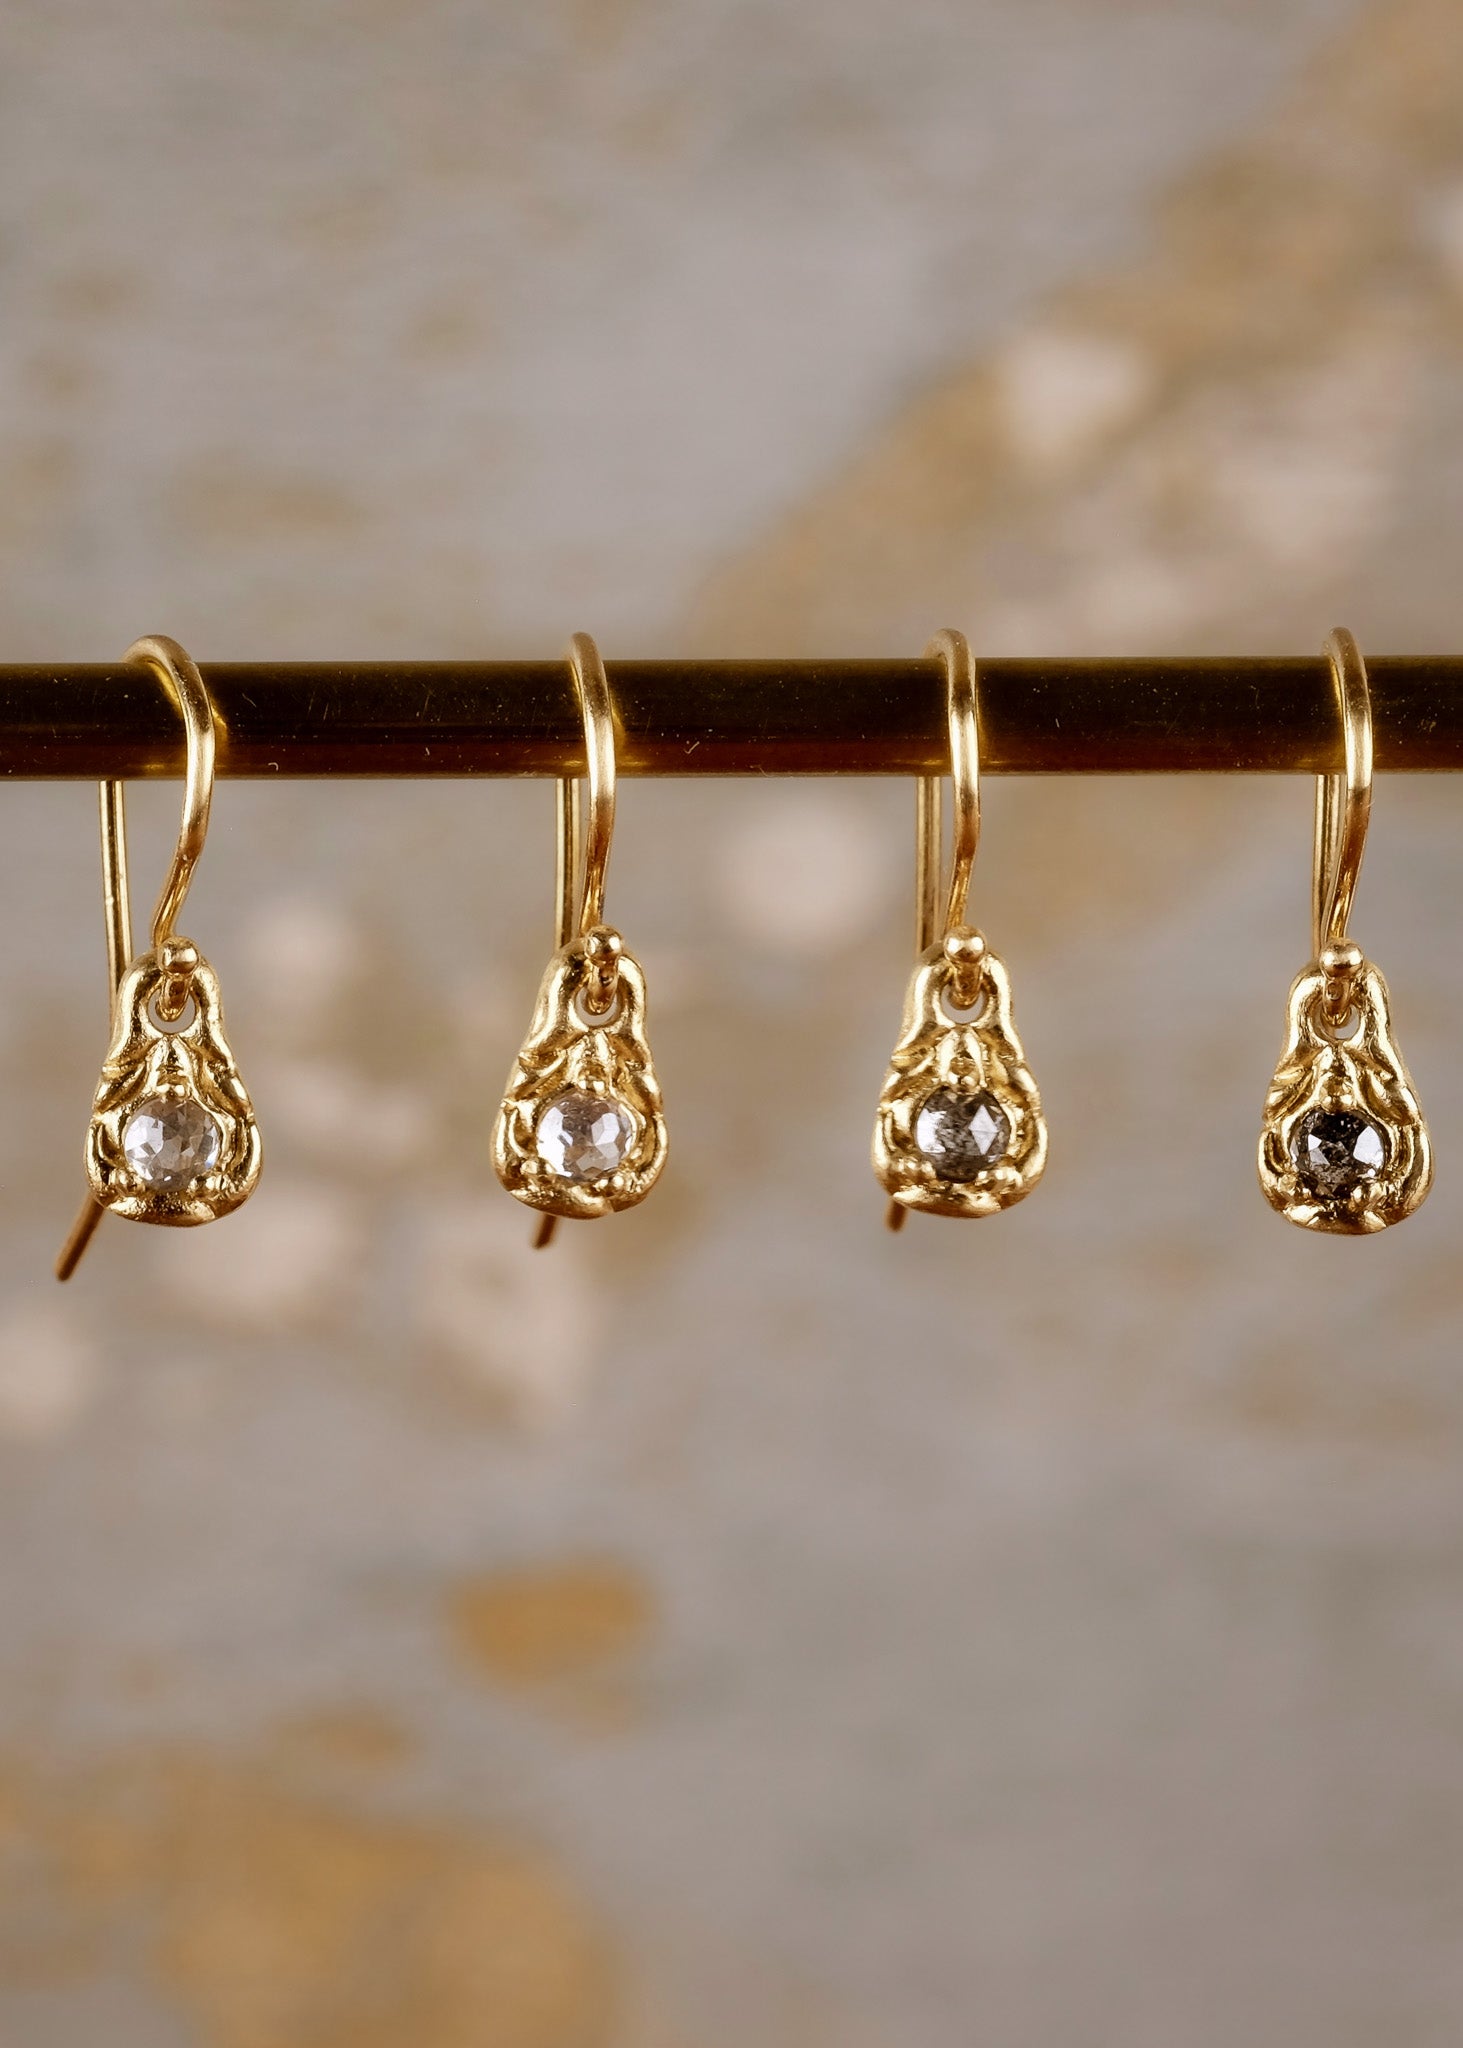 Inspiration, found. These delicate earrings gleam in hand-carved gold, their intricate pattern playing up the rose cut diamonds that shine from their center–a beacon for the Muses to bestow knowledge and creativity.